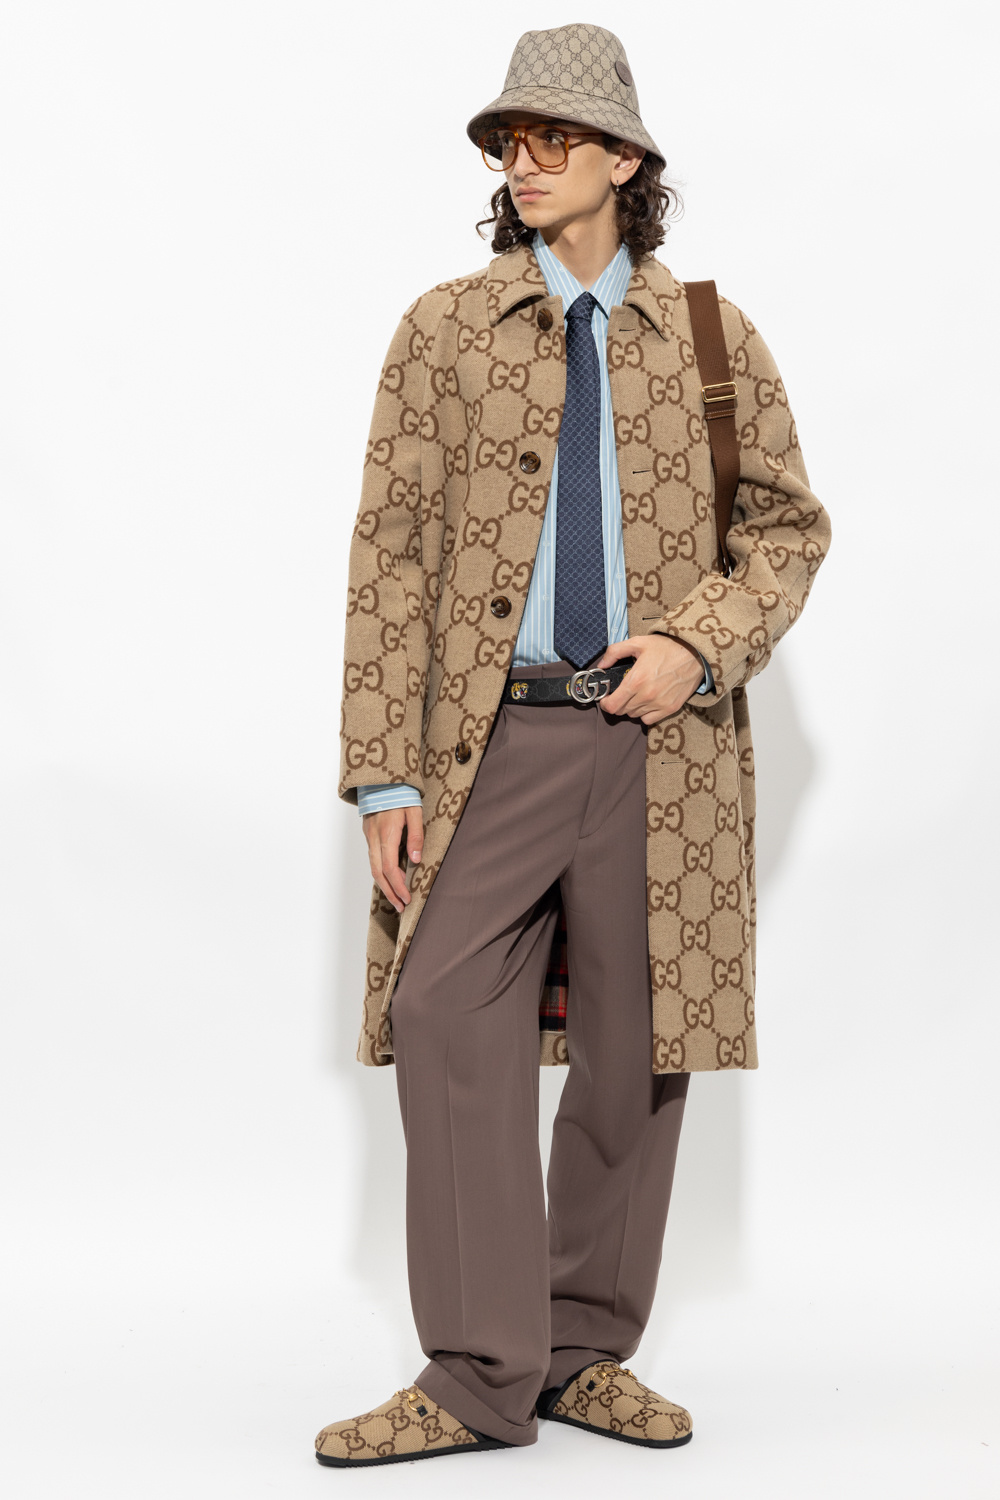 Gucci Kids Monogram Print Double Breasted Coat - Neutrals